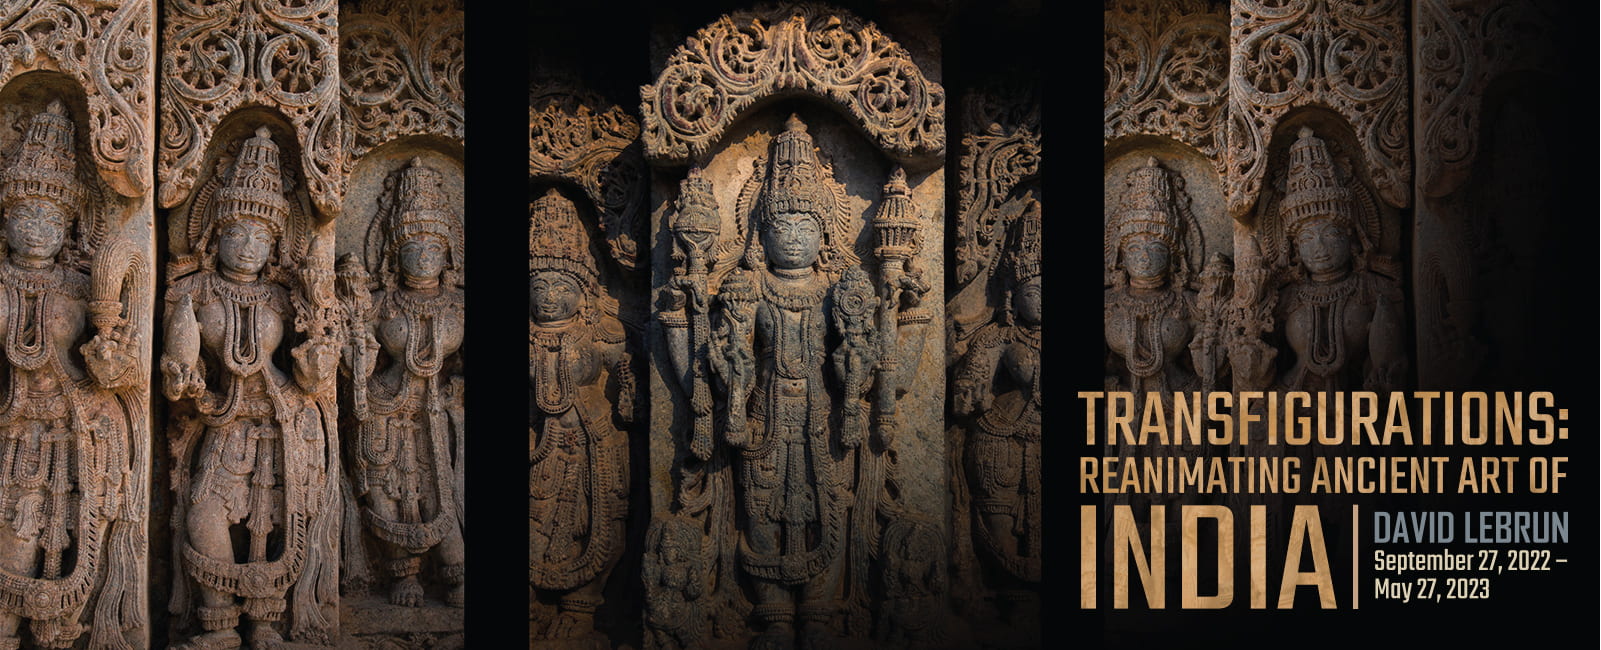 "Transfigurations: Reanimating Ancient Art of India" exhibition at the Beach Museum of Art.